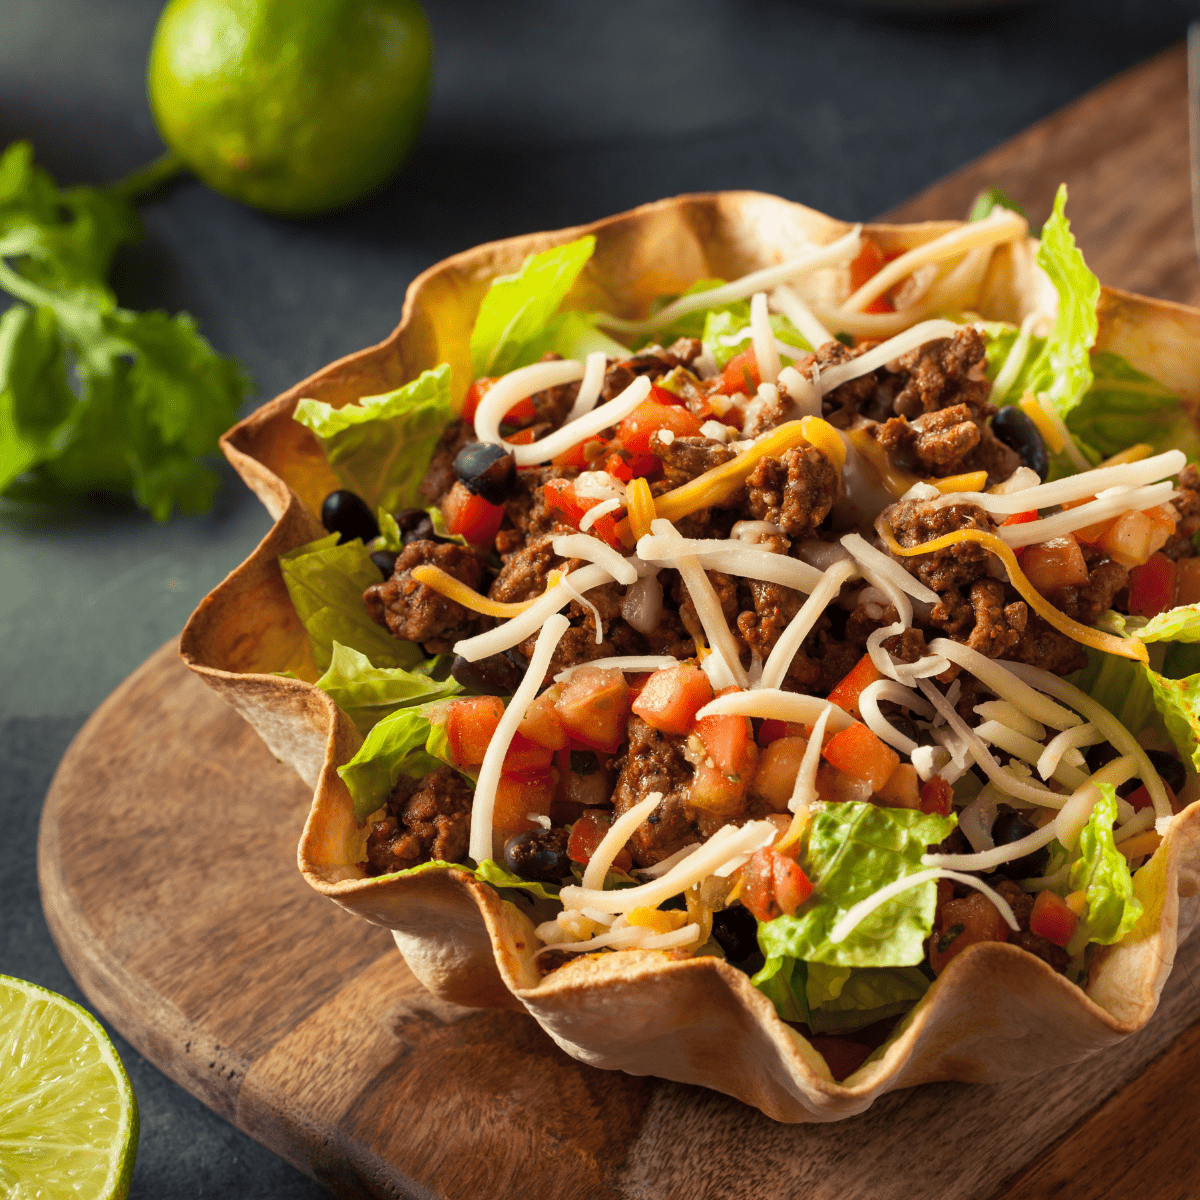 High Quality Low Cost Easy Taco Salad Cups - Just a Taste, salad cup